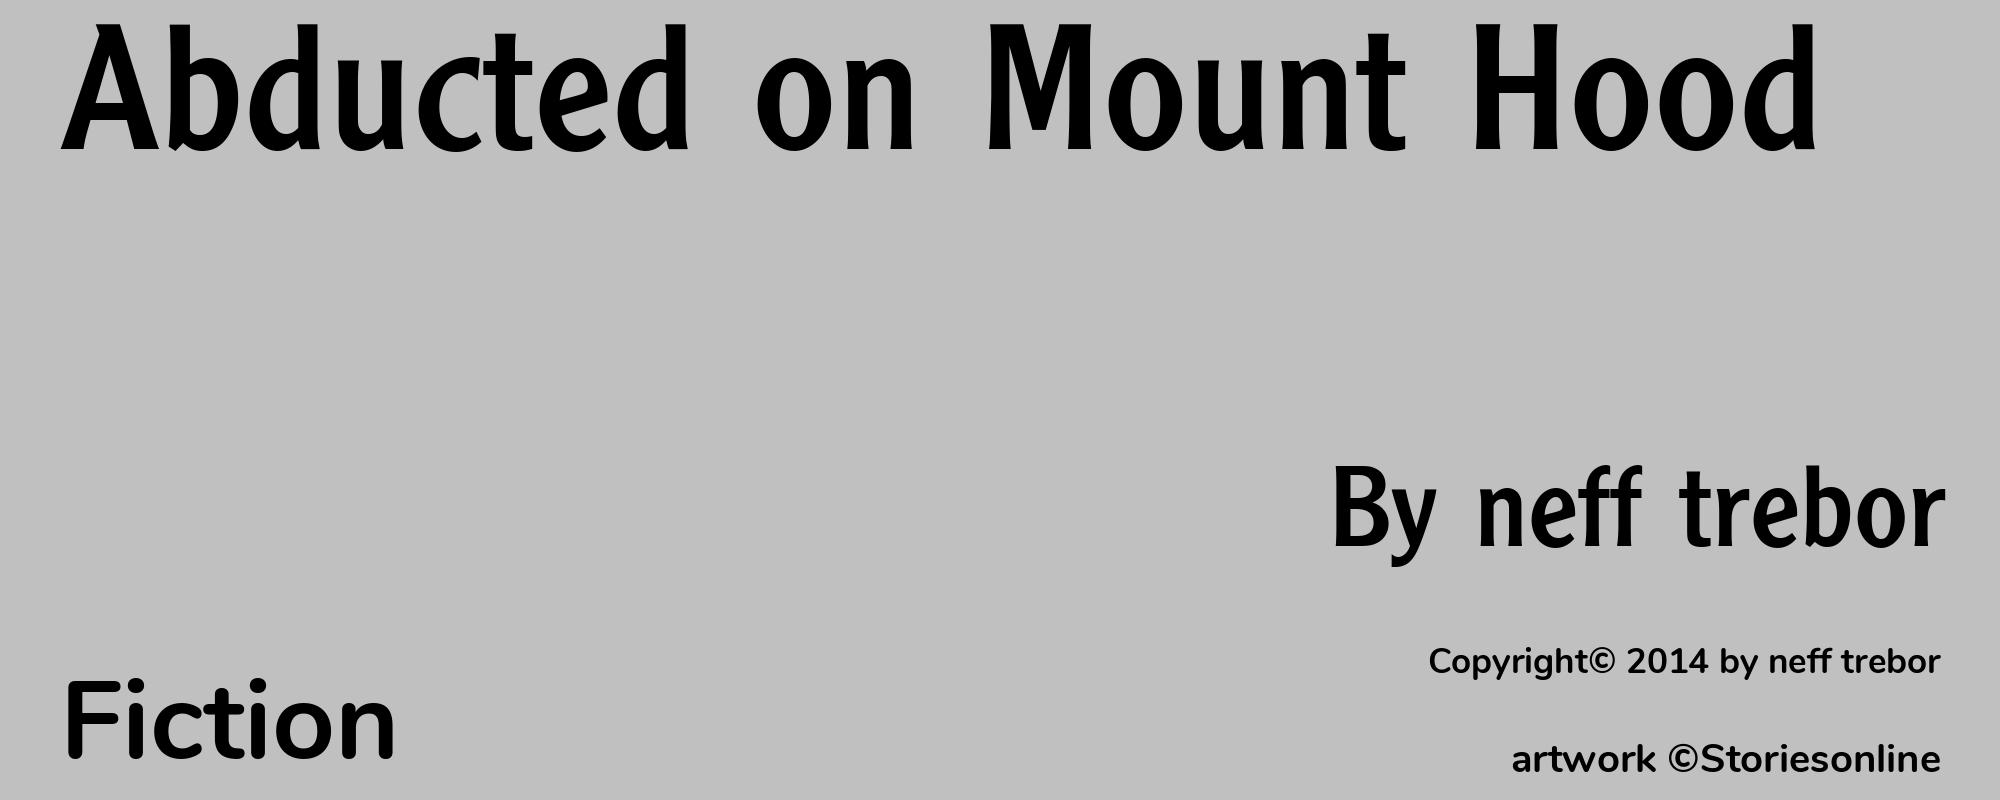 Abducted on Mount Hood - Cover